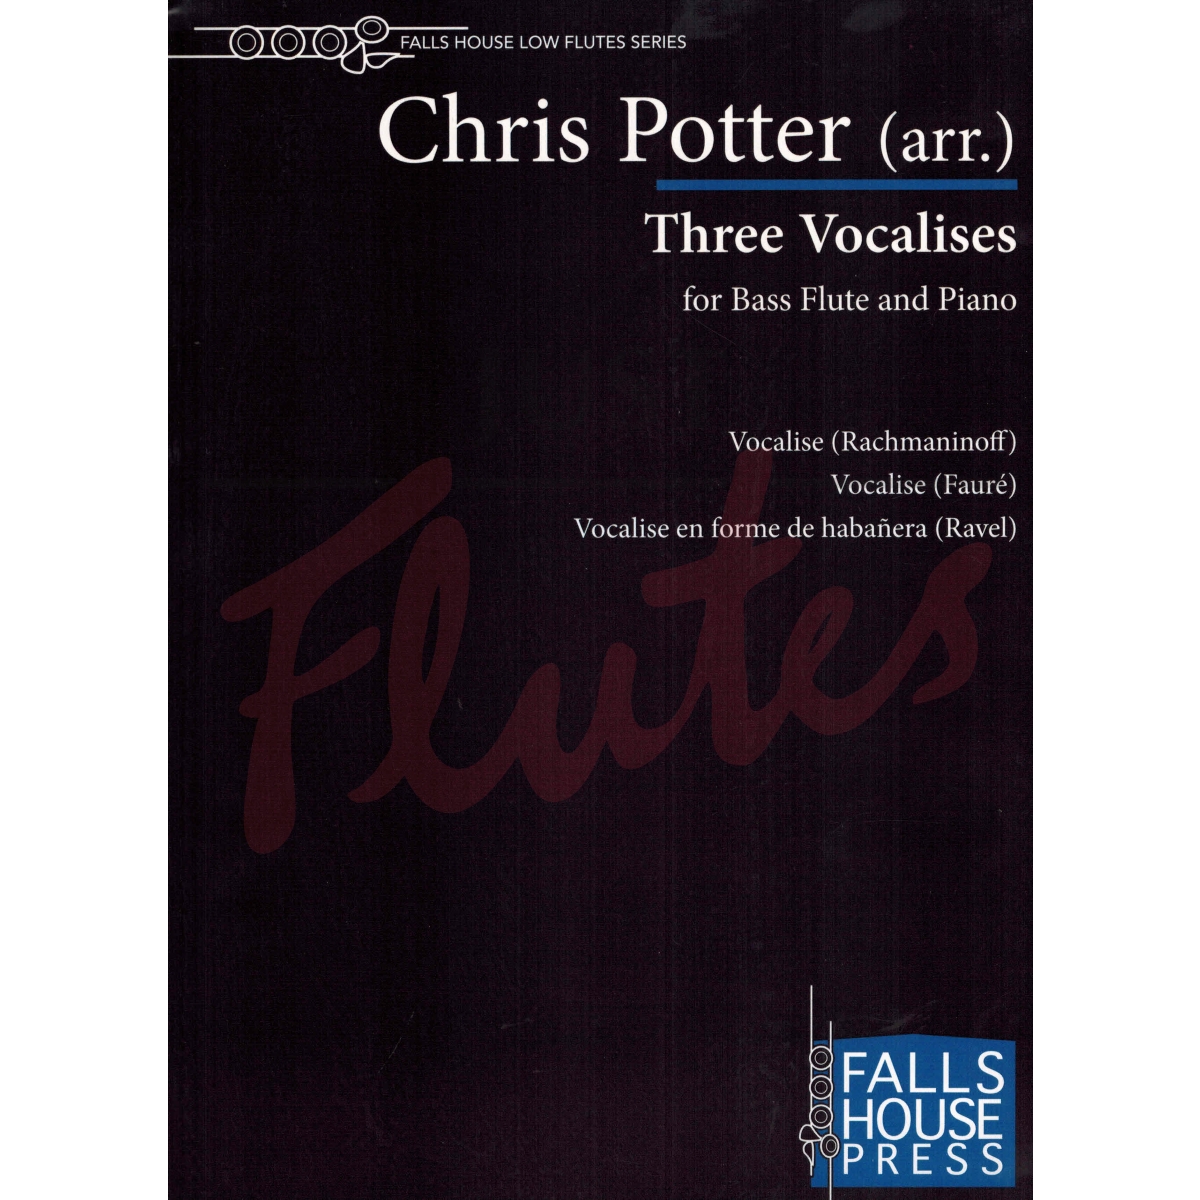 Three Vocalises for Bass Flute and Piano